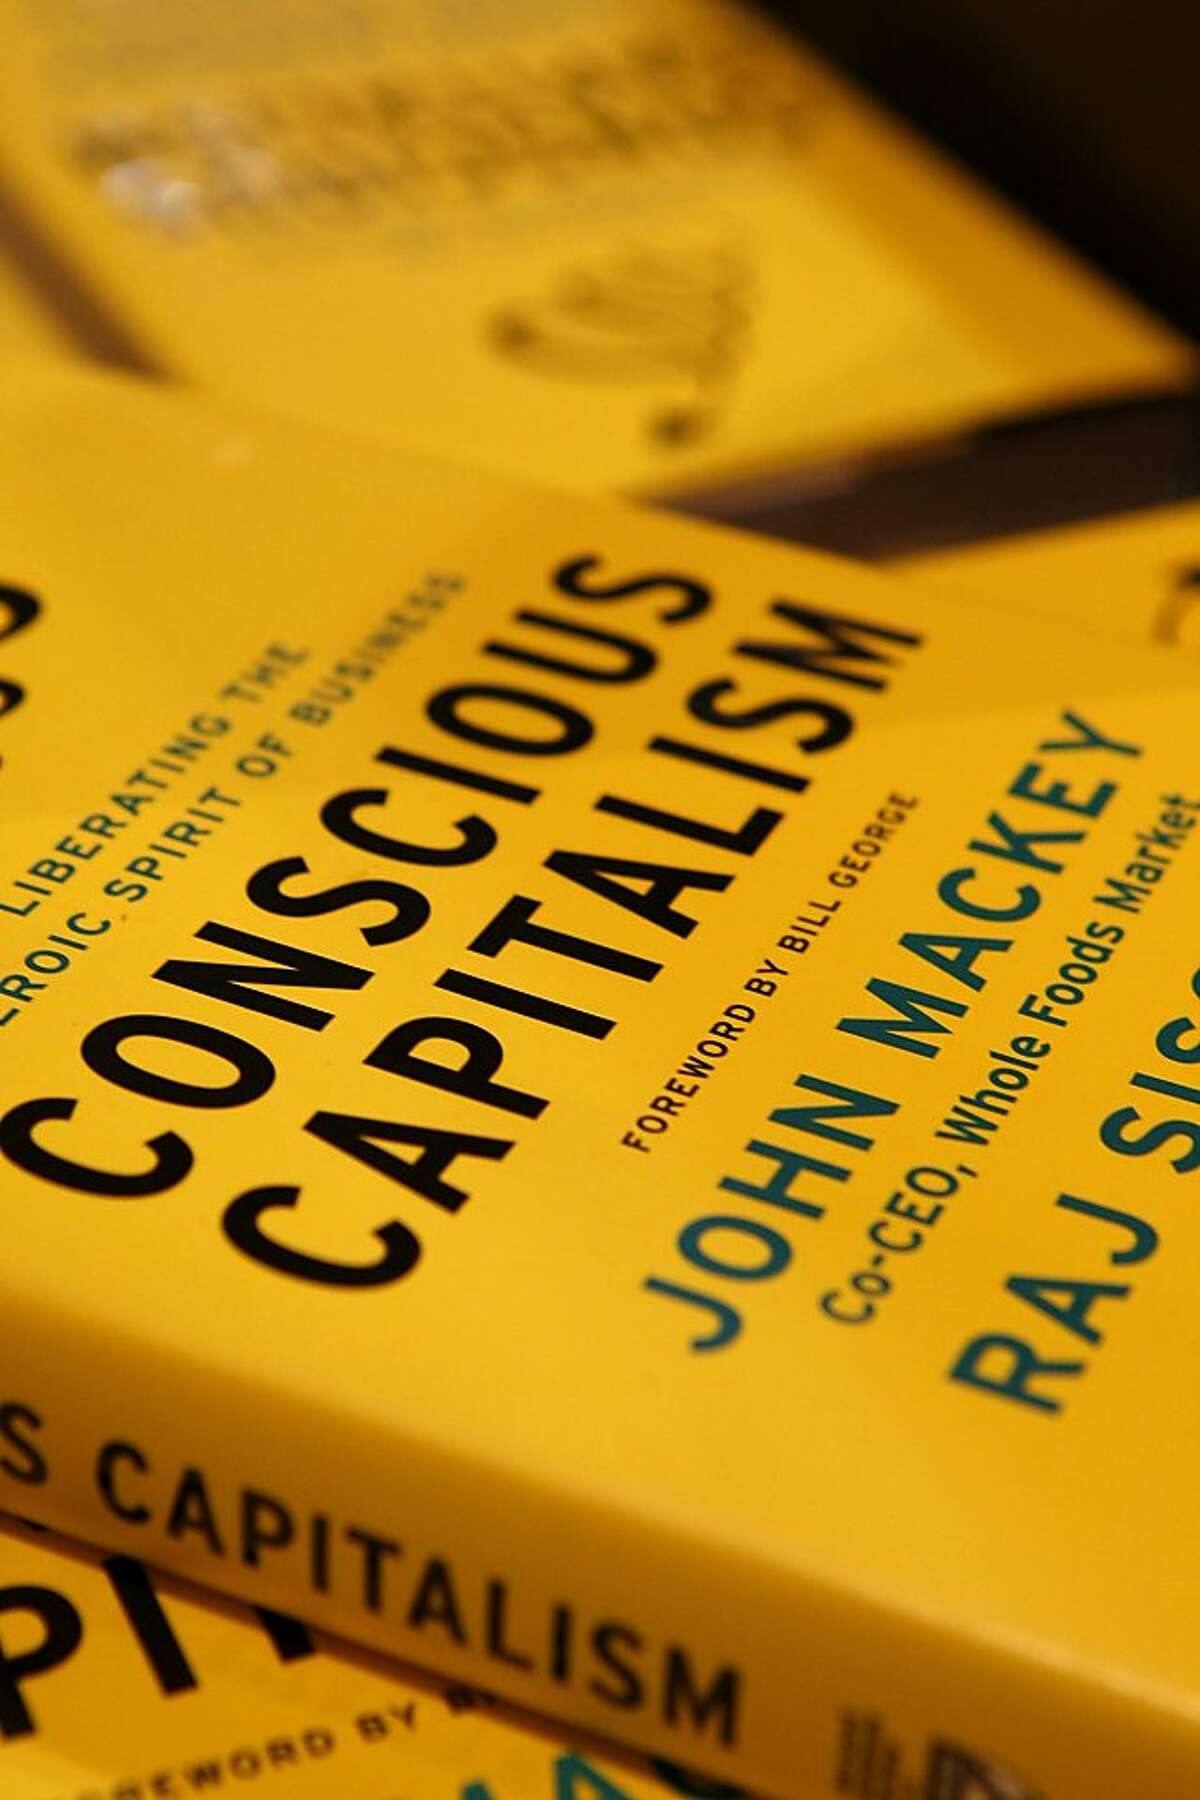 John Mackey's new book, "Conscious Capitalism: Liberating the Heroic Spirit of Business" at the Whole Foods in Potrero on January 22, 2013 in San Francisco, Calif. Mackey is both co-founder and co-CEO of the Whole Foods supermarket chain.